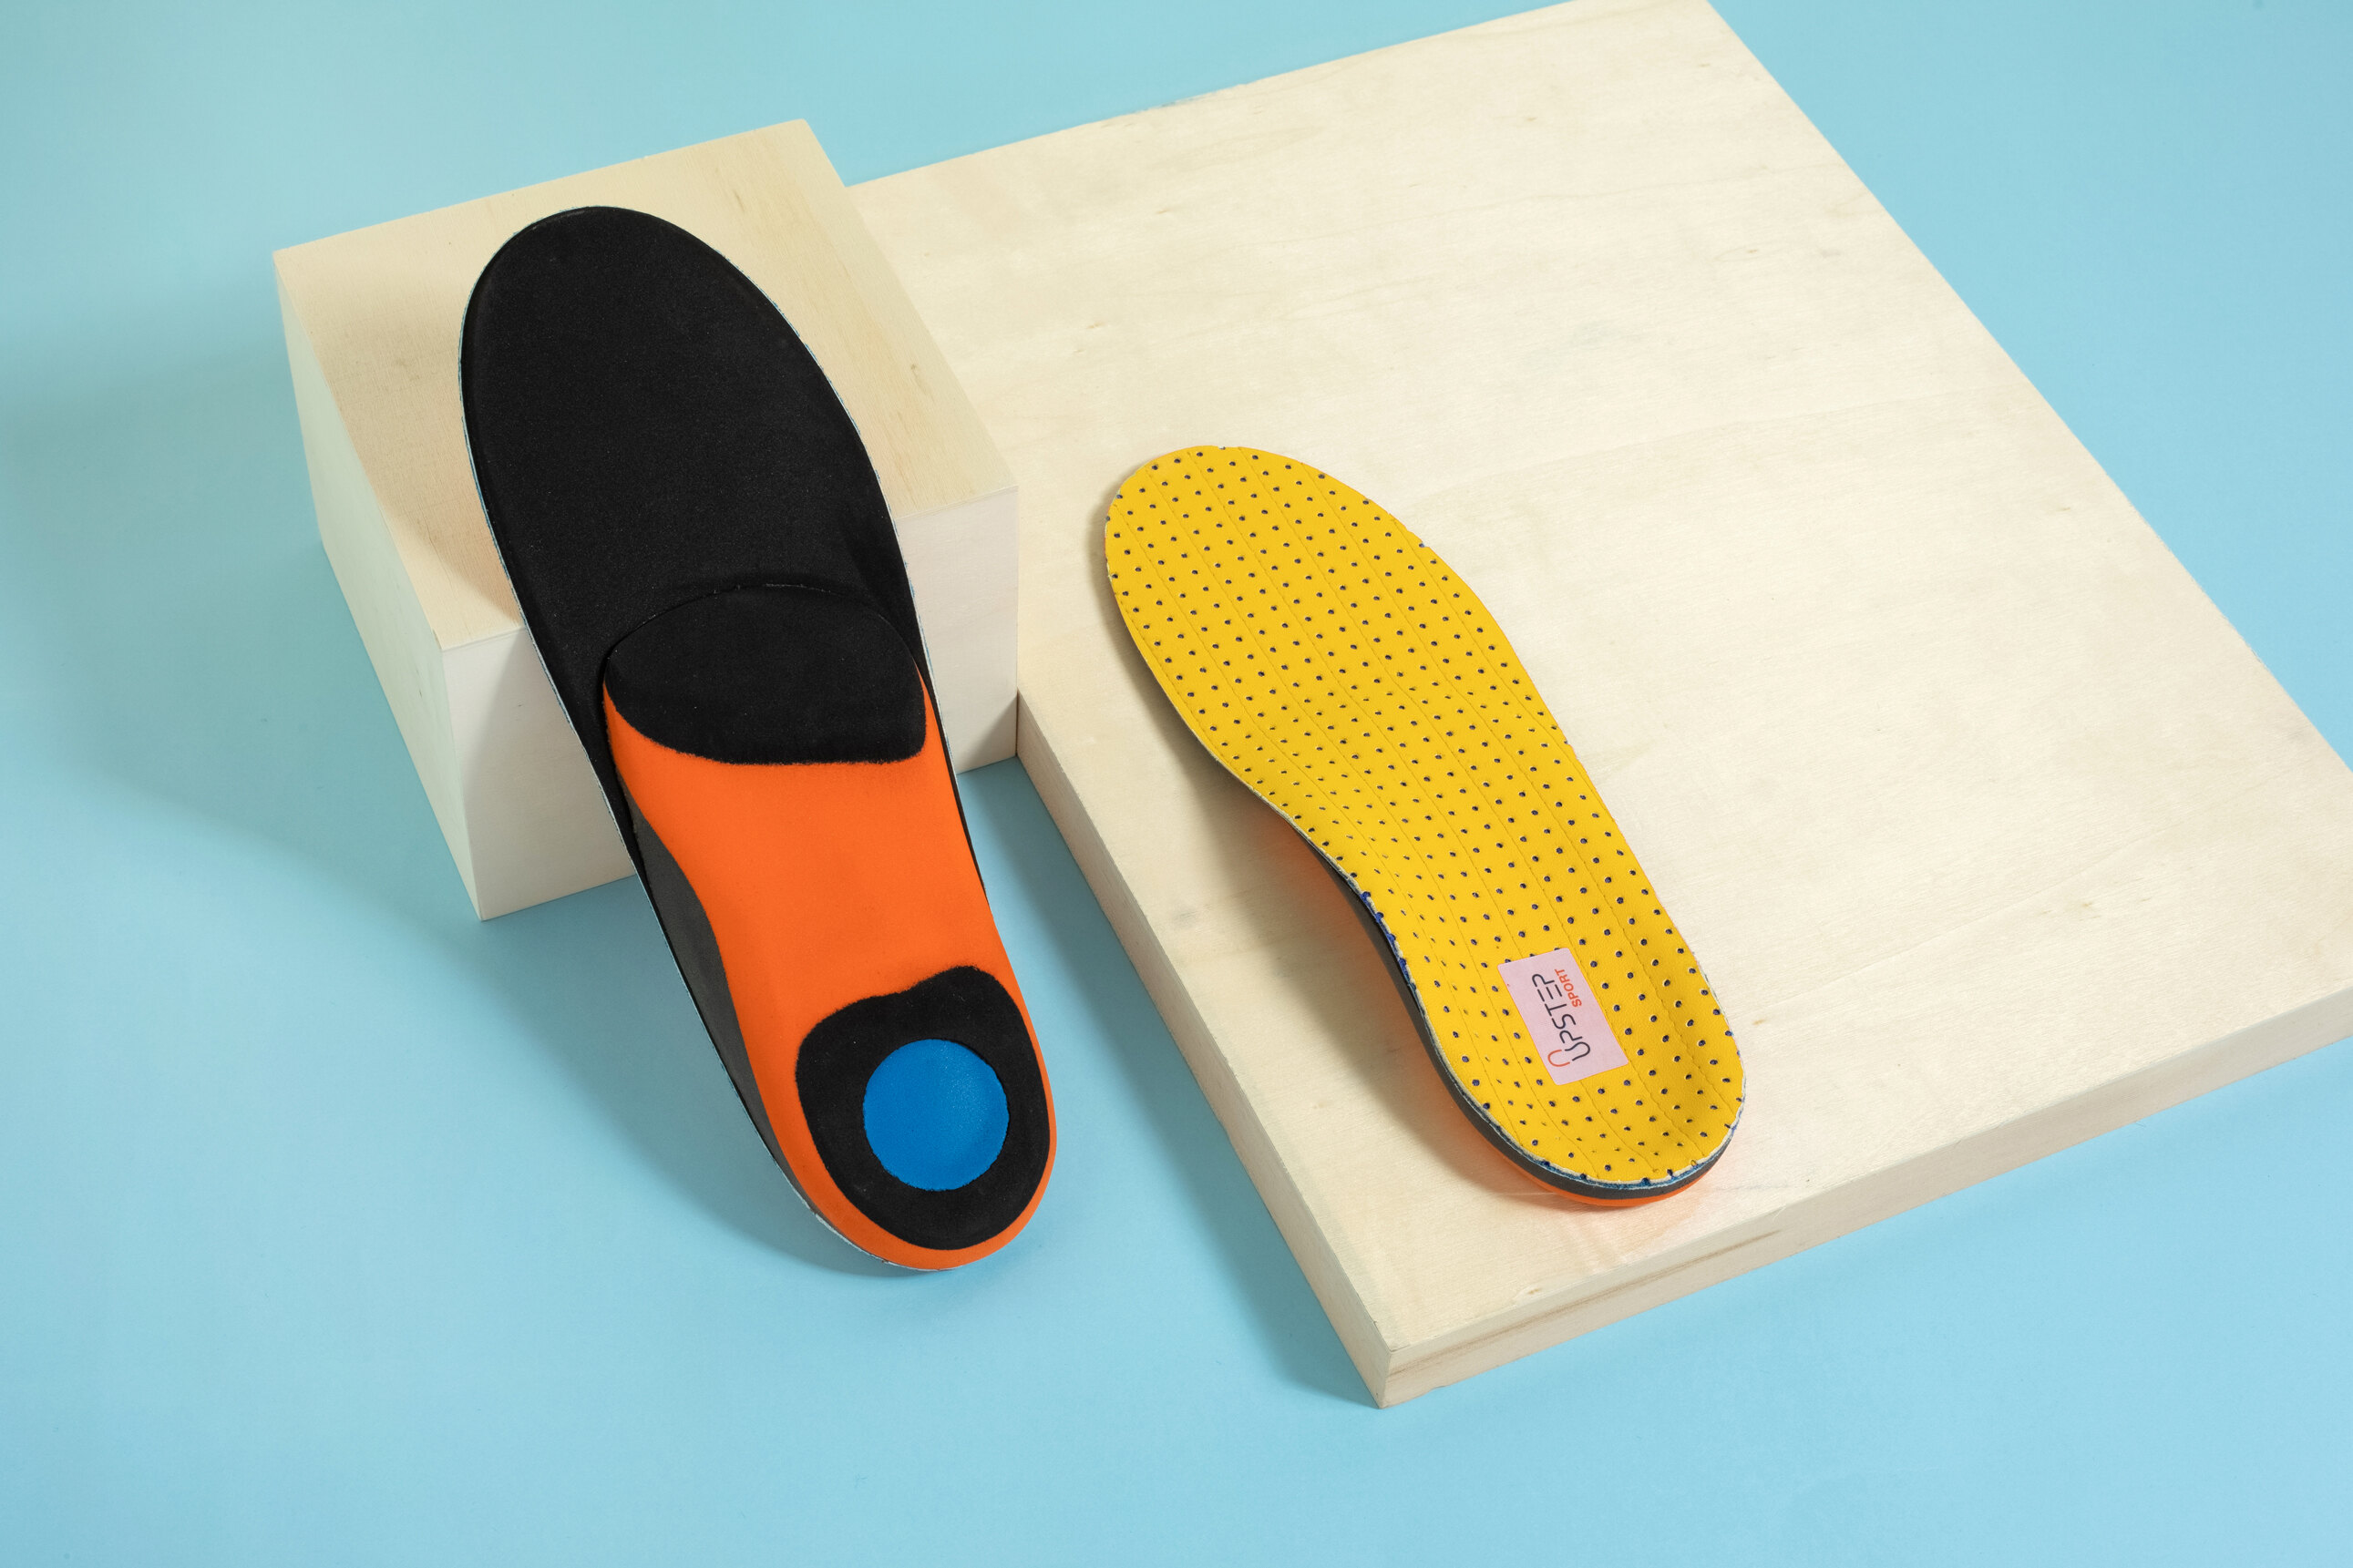 Pair of insoles displayed on blocks, showing back and front of the insoles